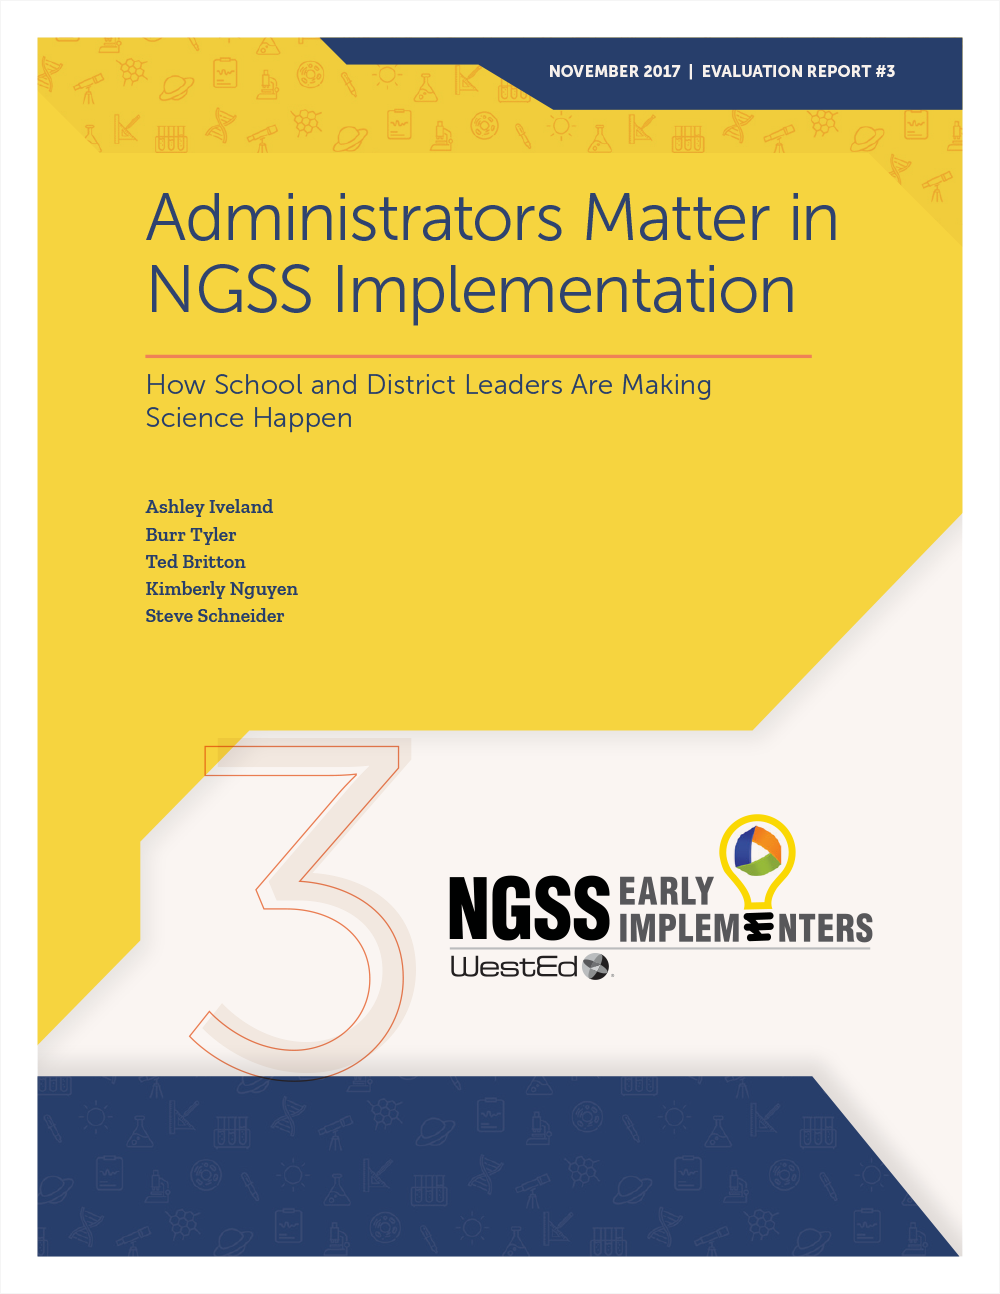 Administrators Matter in NGSS Implementation: How School and District Leaders Are Making Science Happen